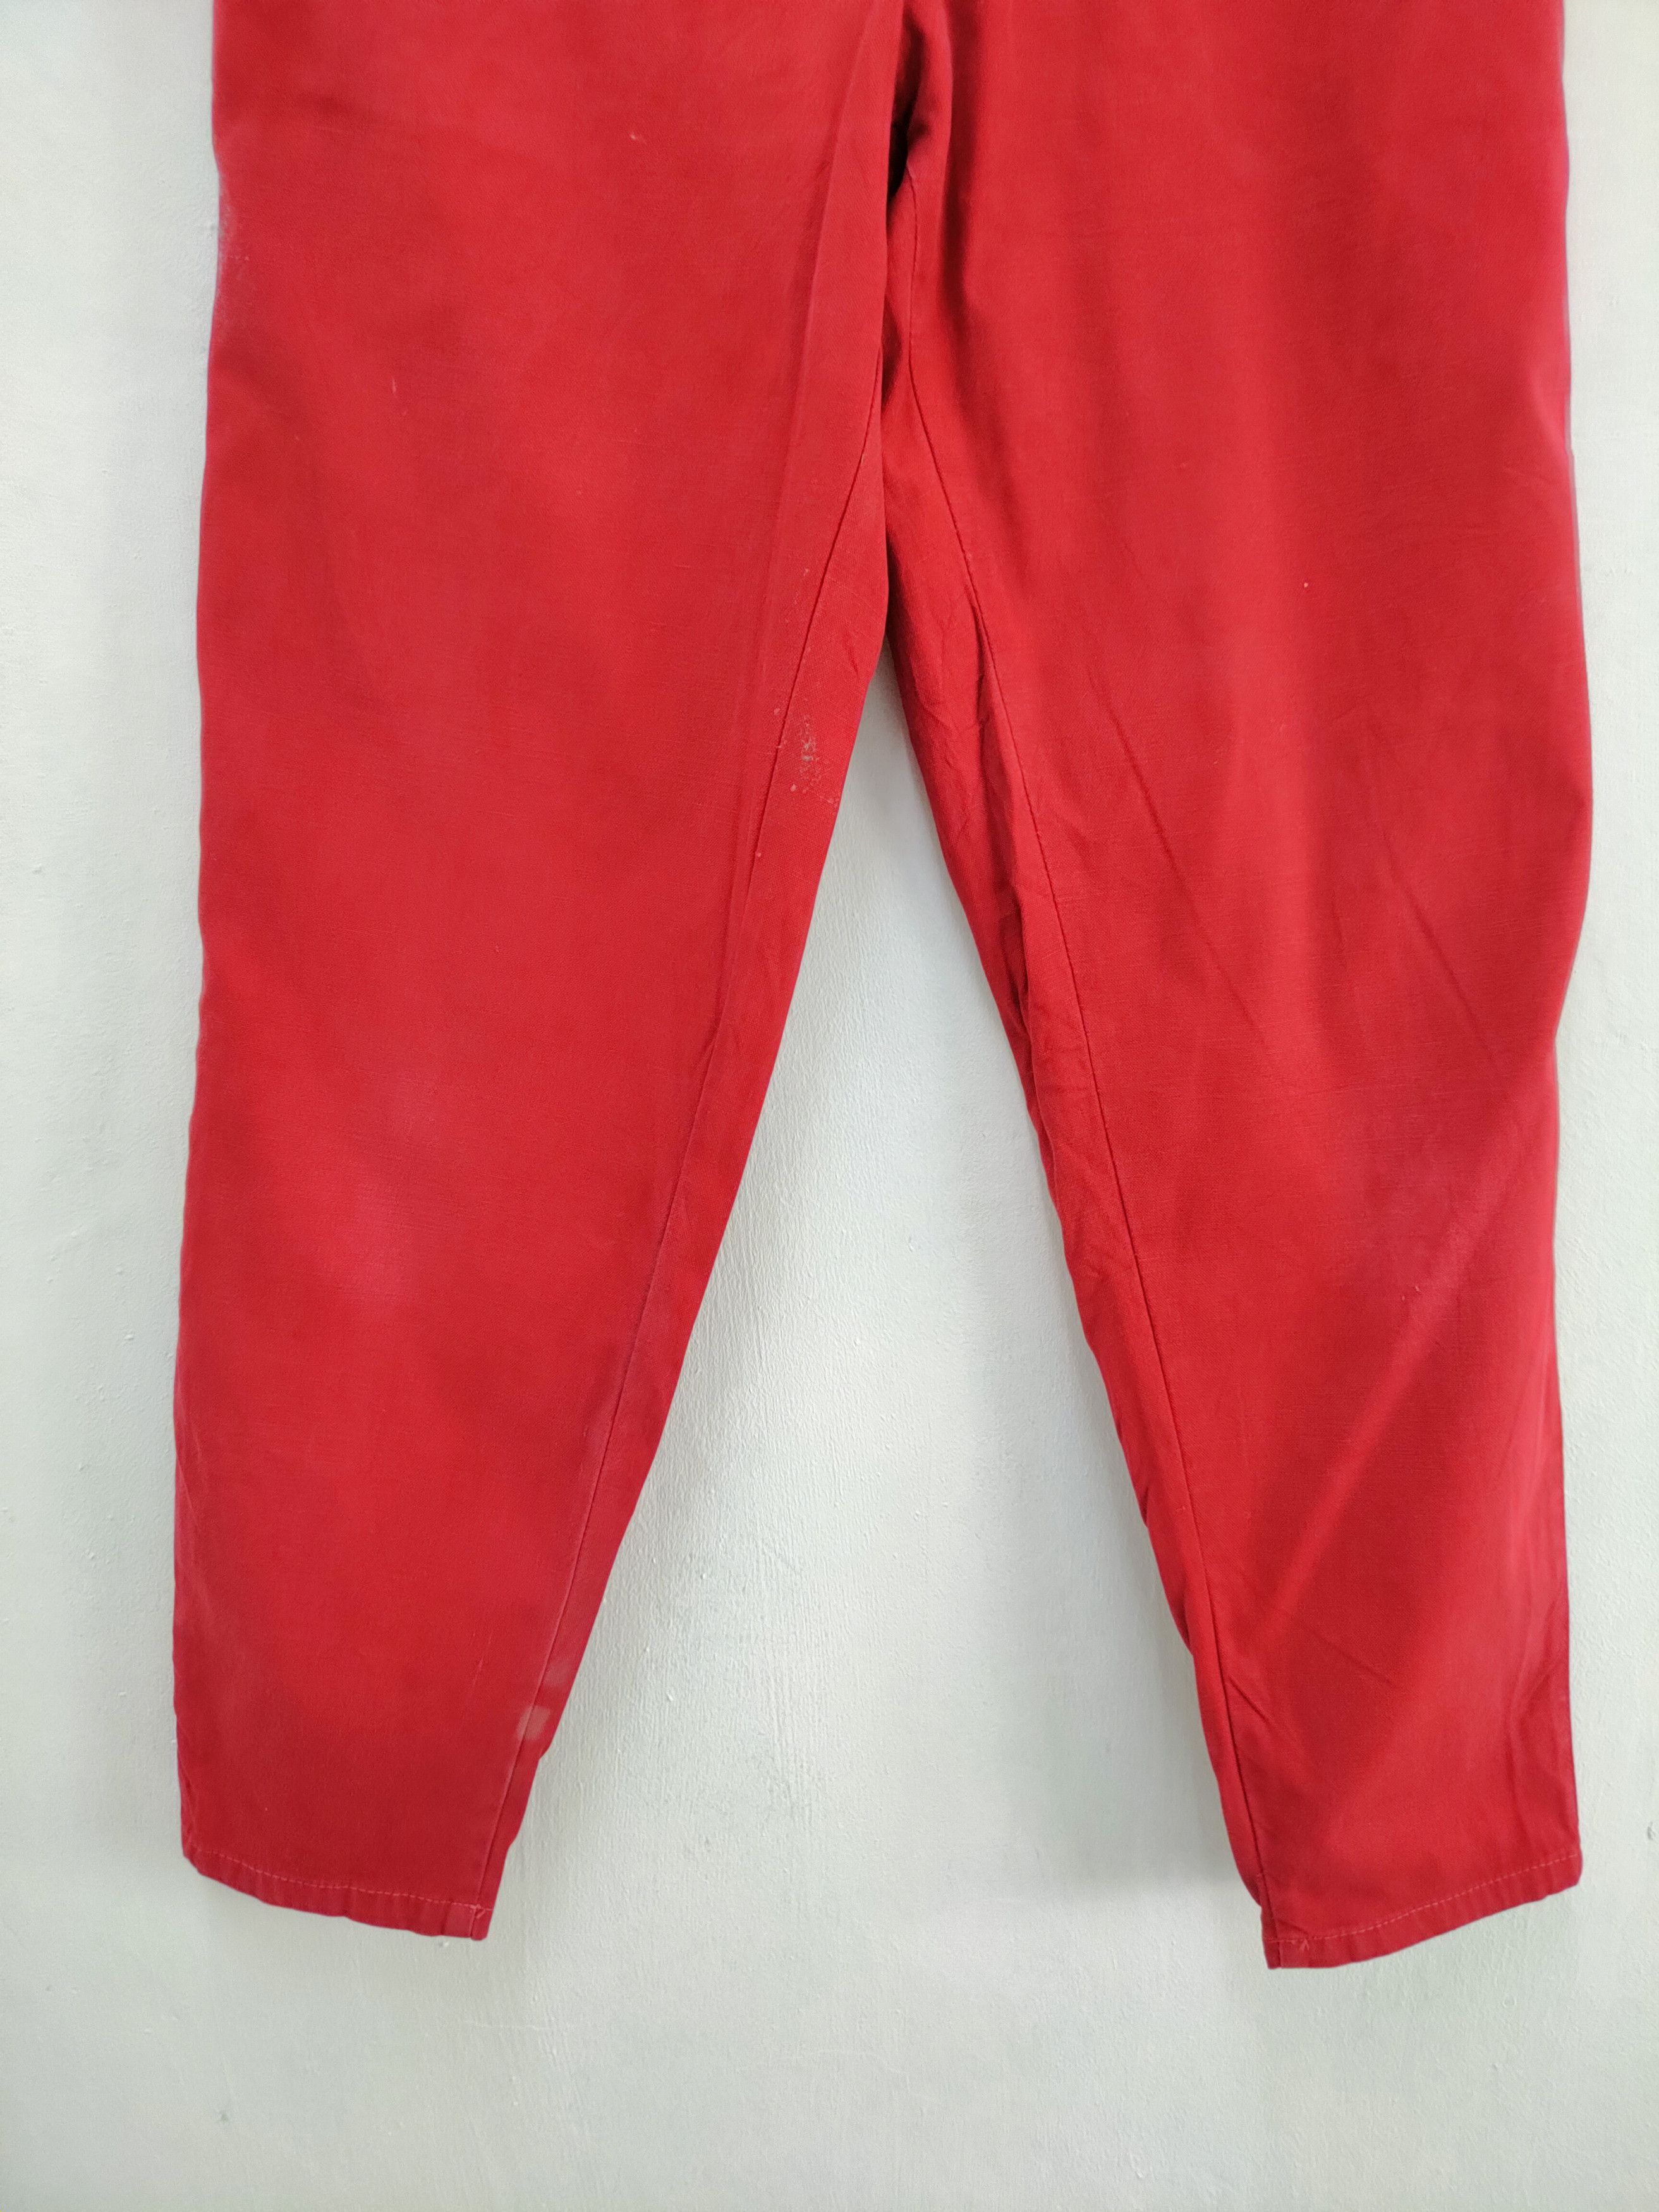 Linea Linea Vicenza Red Pants Made In Japan Size US 26 / EU 42 - 4 Thumbnail